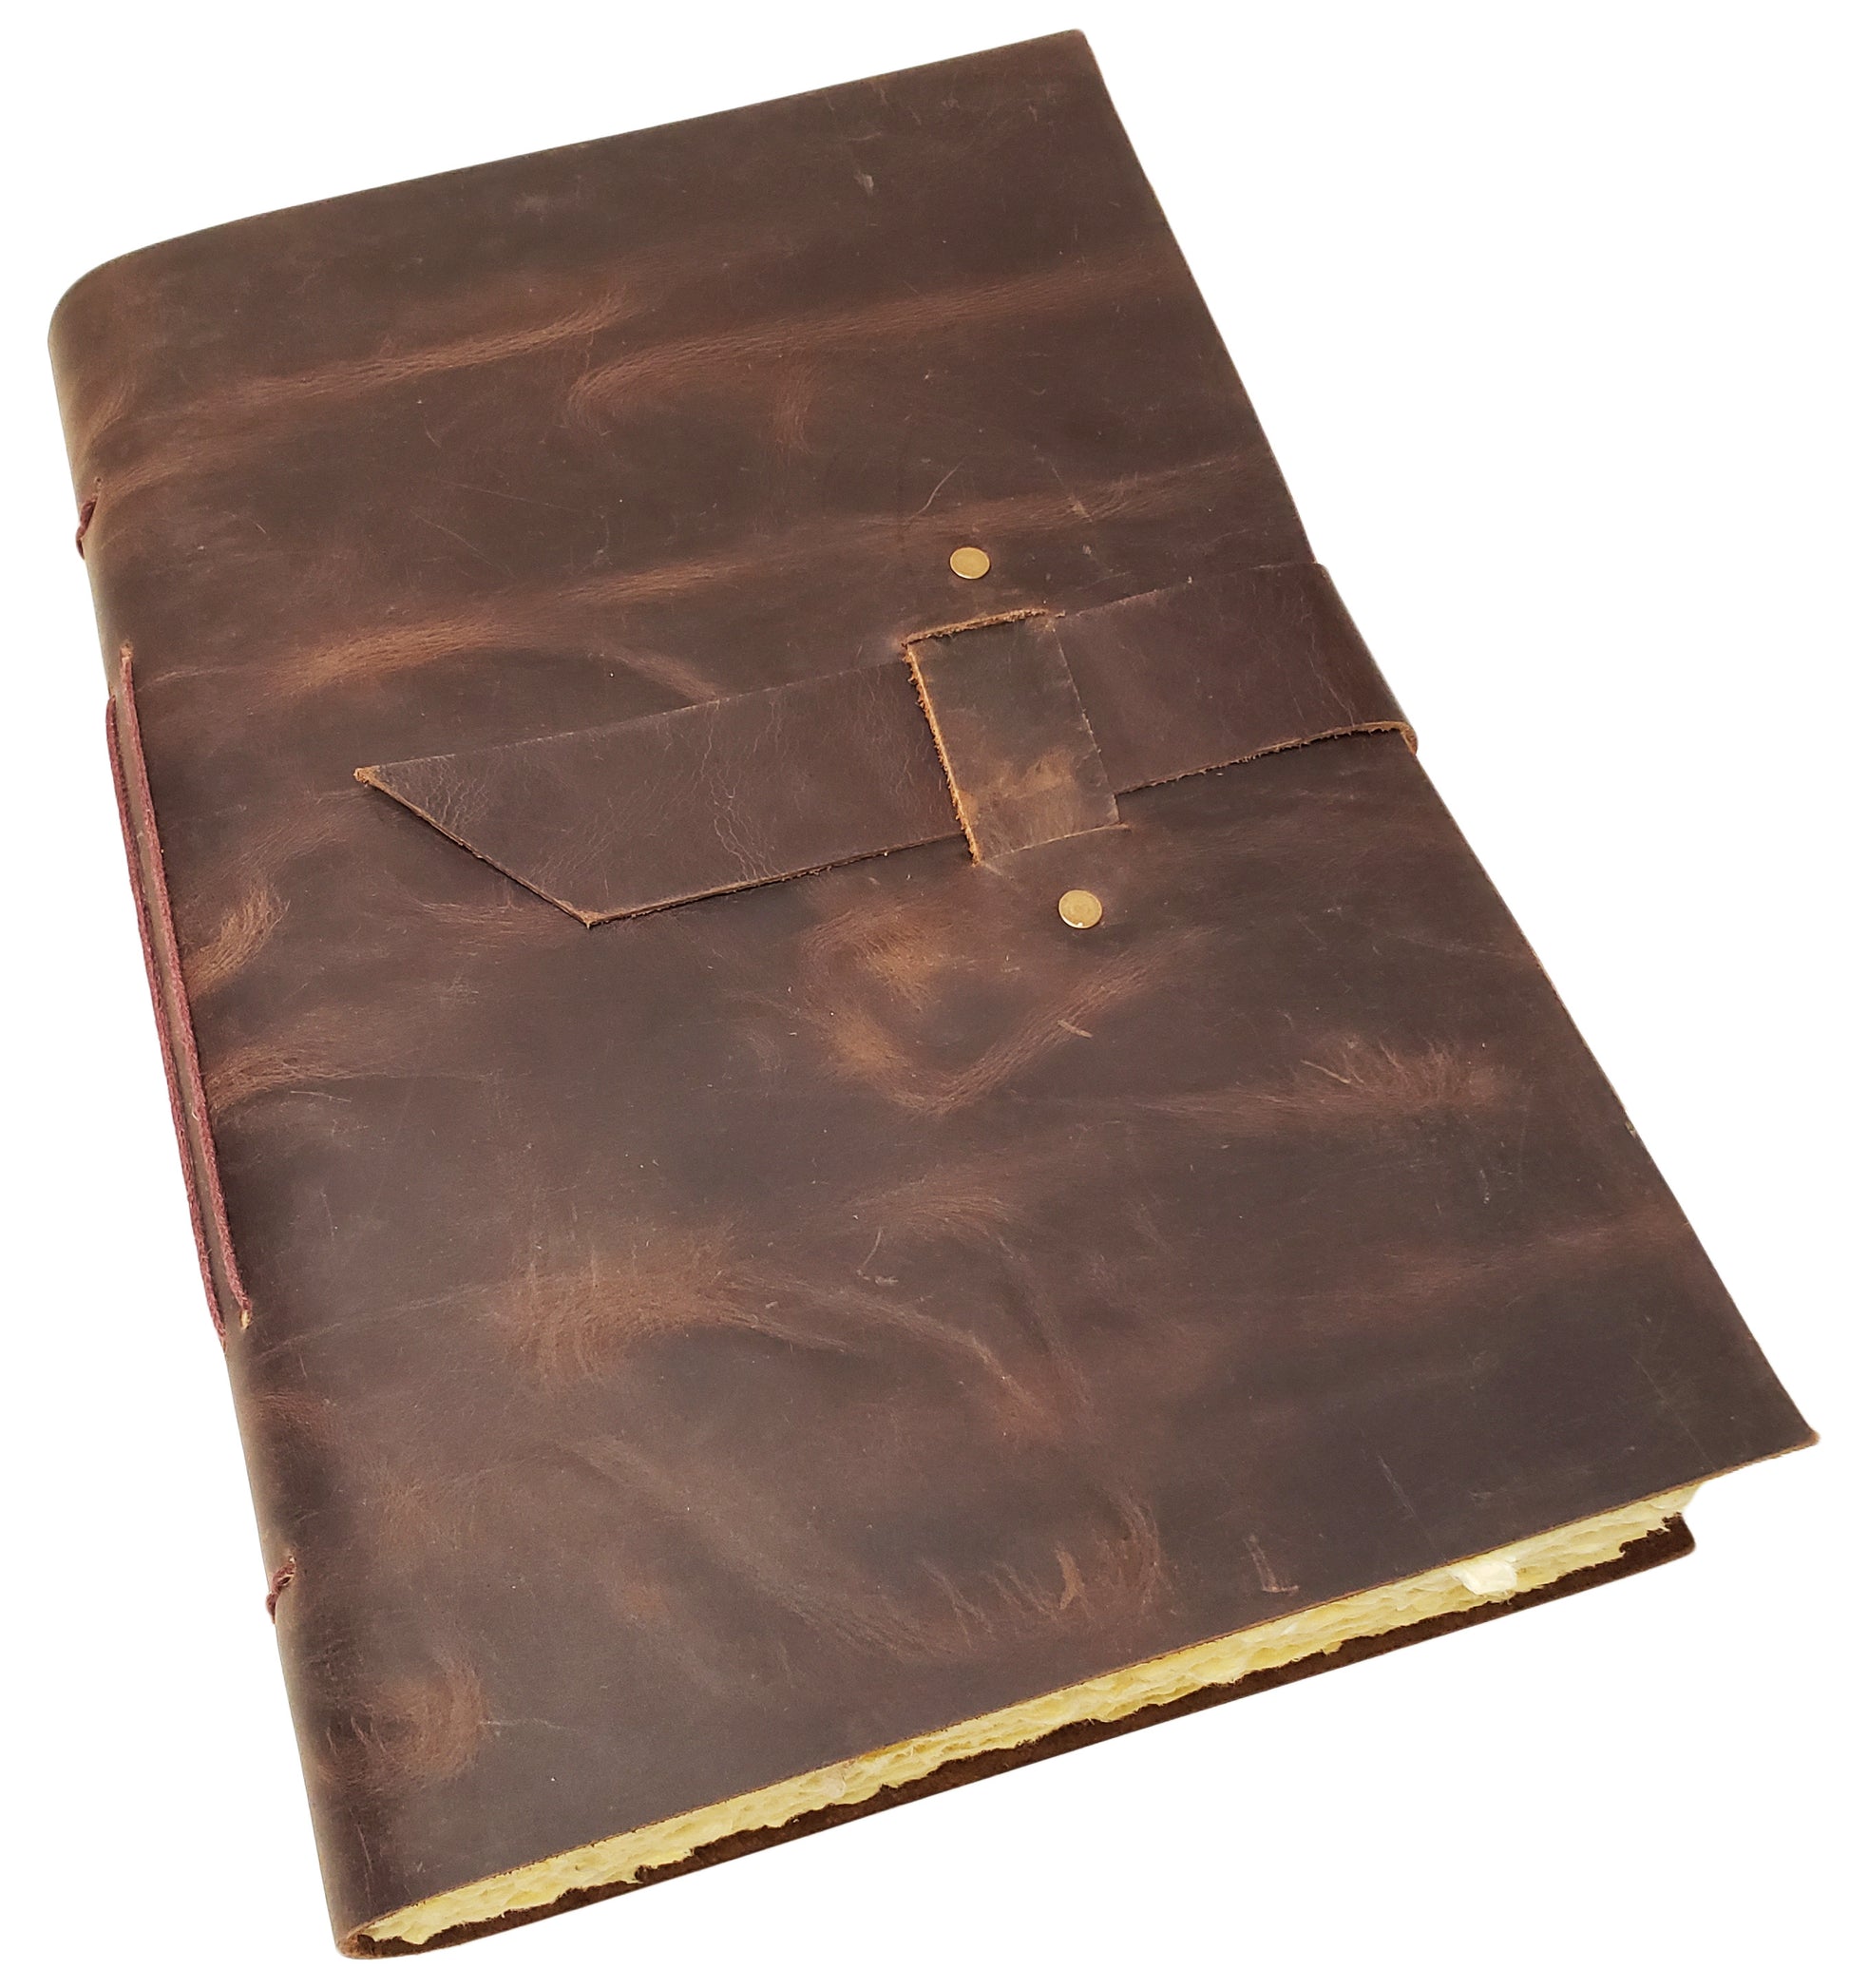 Large Genuine Leather Journal/Sketchbook with Gift Box - 380 Pages - 9 x  12 - Rustic Vintage Style